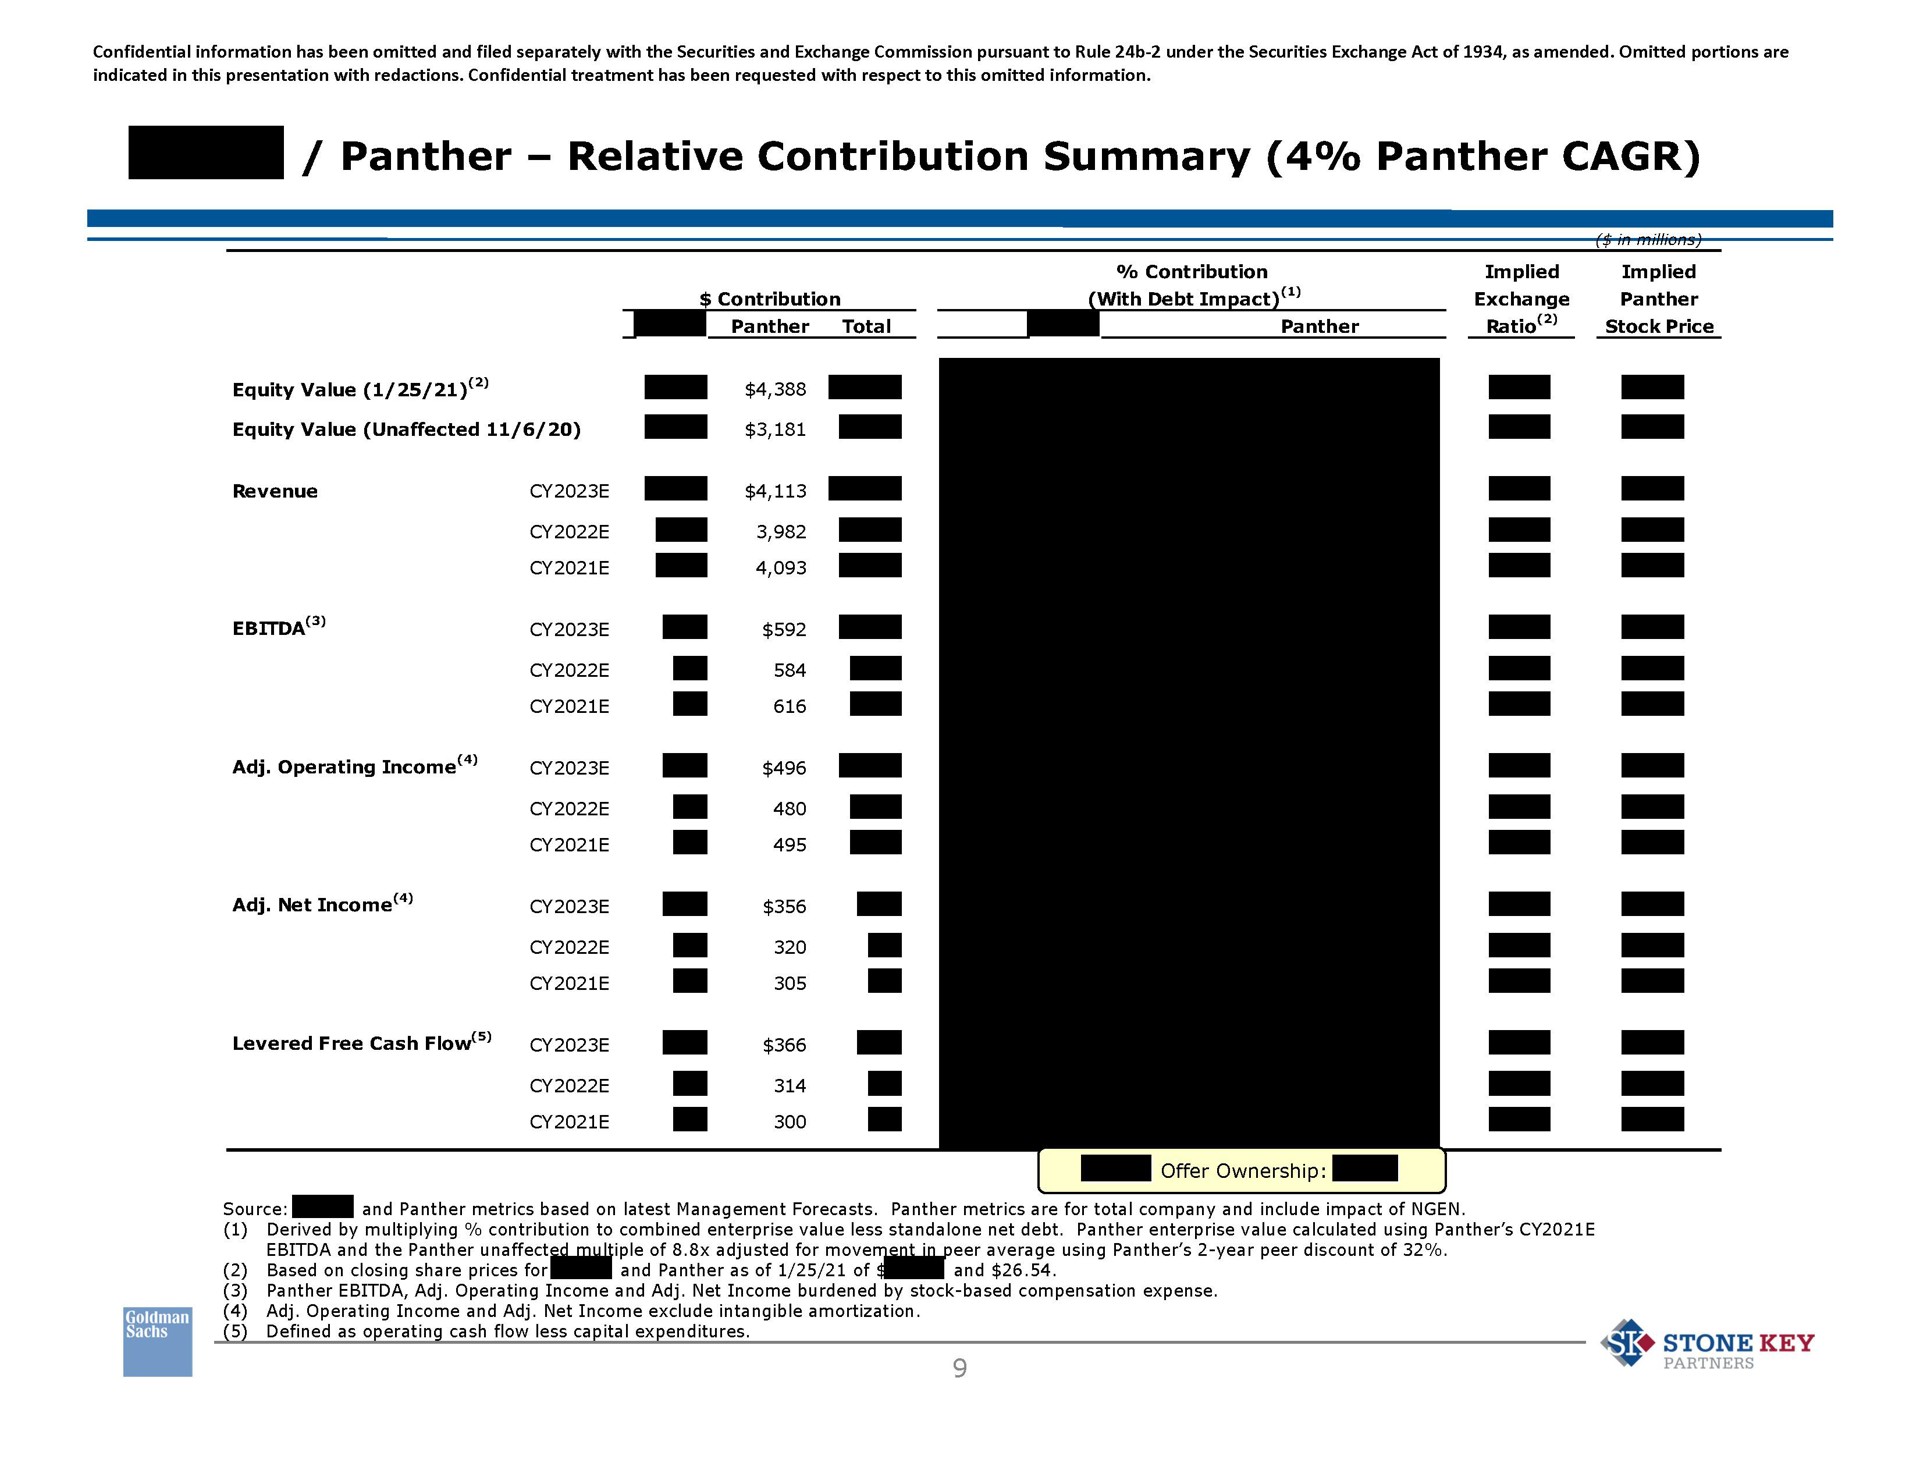 panther relative contribution summary panther panther total panther ratio equity value equity value unaffected i revenue operating income net income levered free cash flow i i a i i i i an so stone key | Goldman Sachs